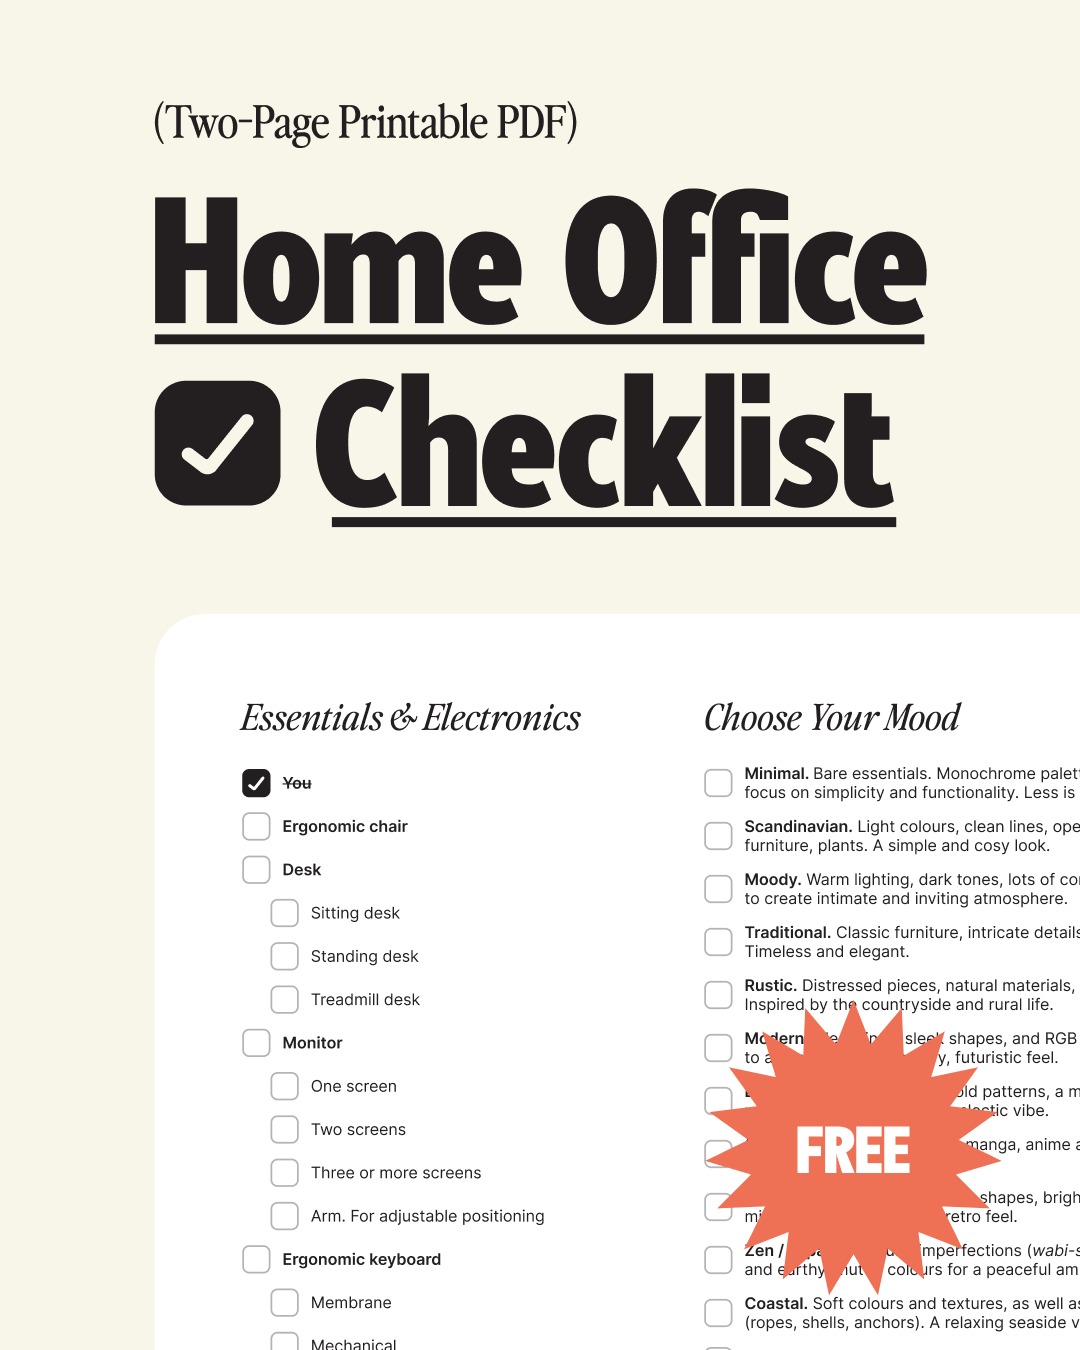 34 Items for Your Home Office Setup Checklist (Printable)